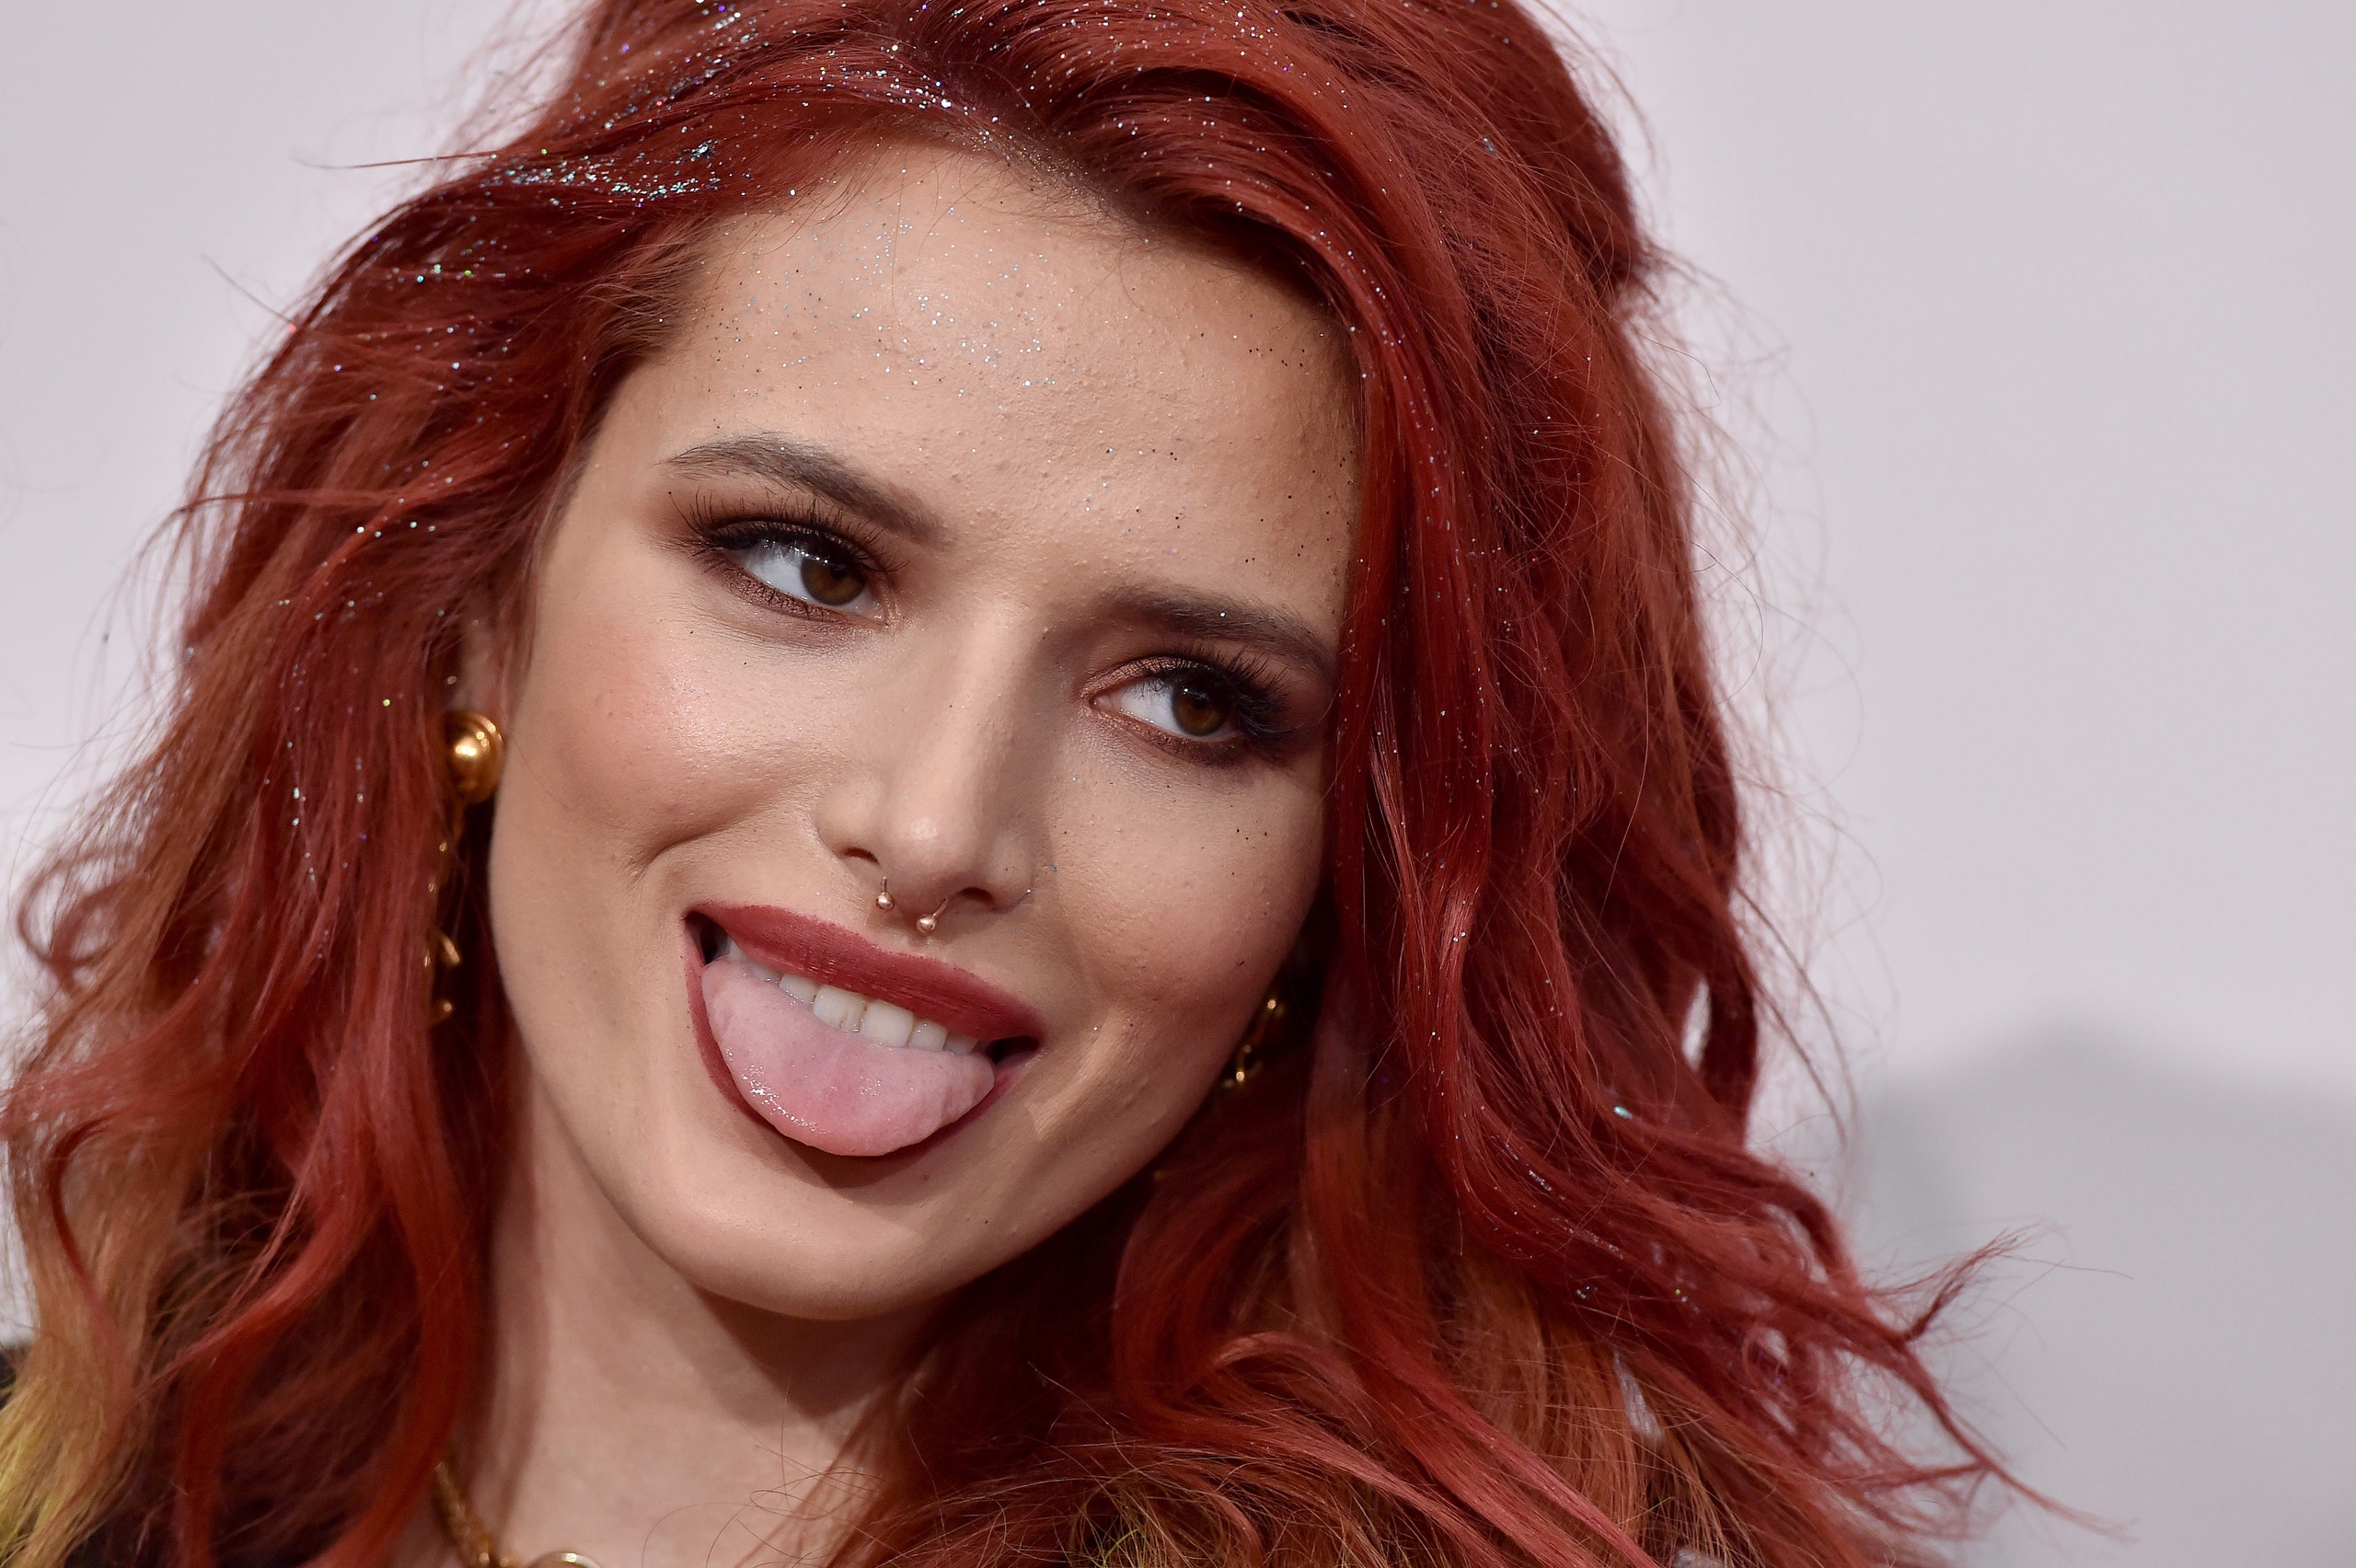 denis lee recommends bella thorne dick pic pic